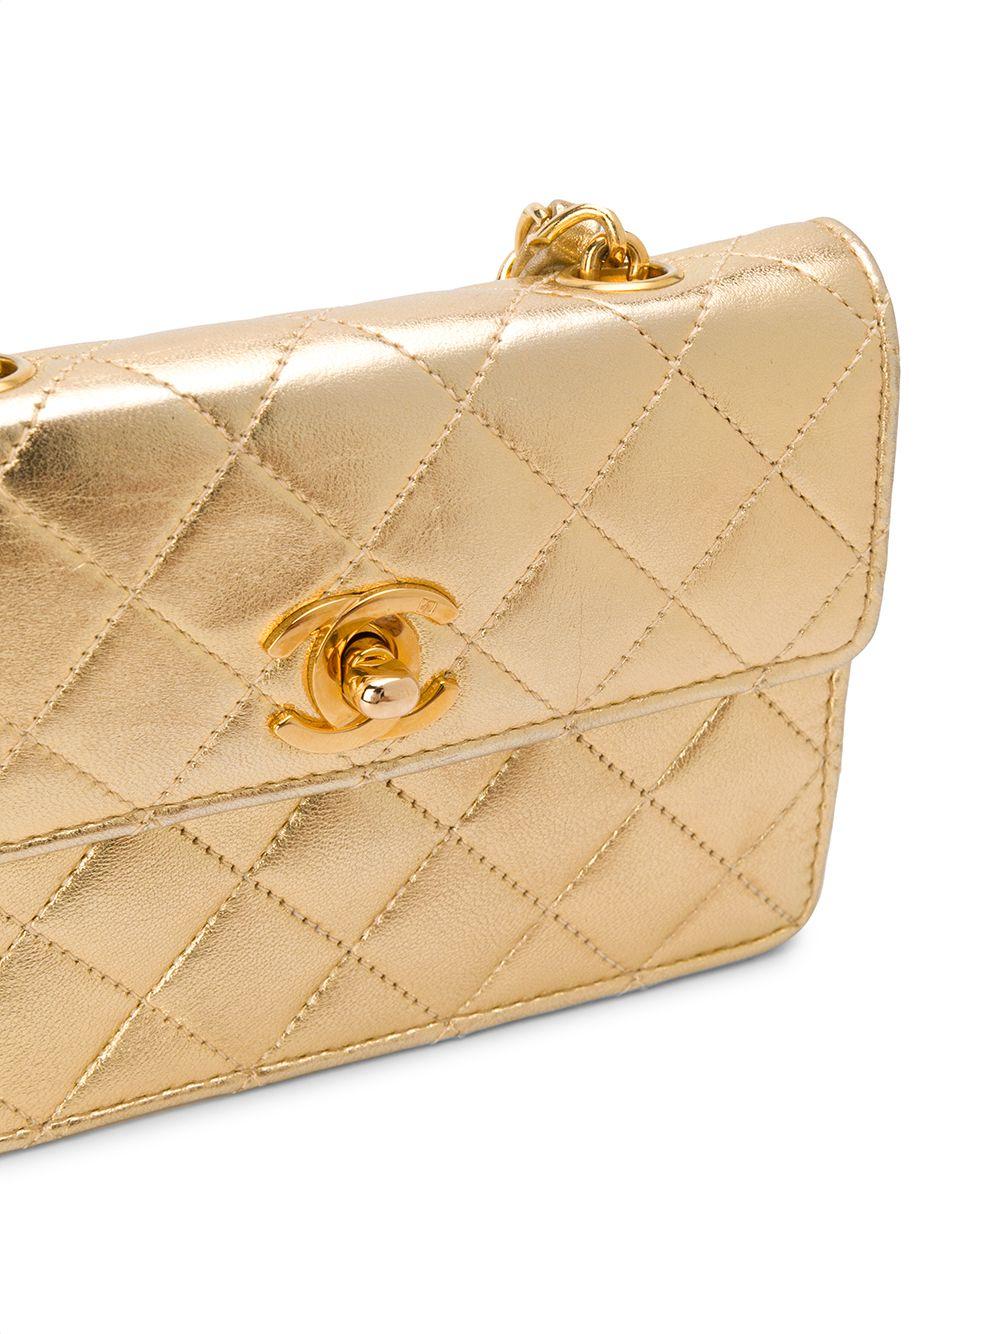 Crafted in France from an intricately luxurious combination of gold calfskin leather and yellow-gold tone metal, this timeless pre-loved Chanel crossbody bag features a diamond quilted finish, an opulent metallic sheen, and a leather laced chain